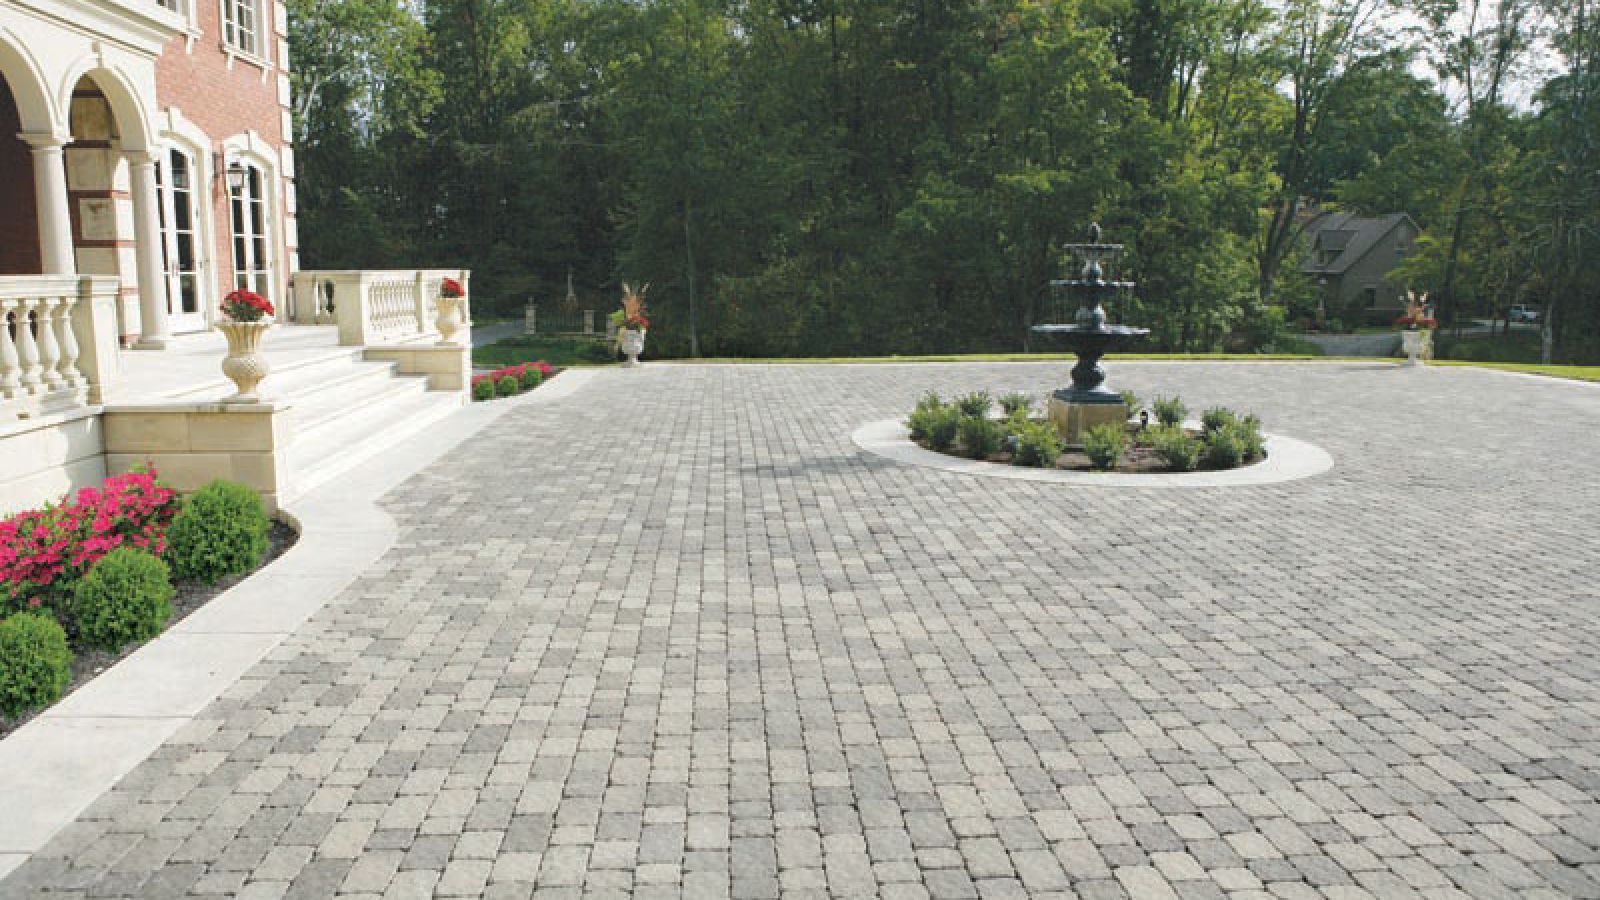 Adirondack pavers by KeyStone, available at AR Stoneworks & Outdoor Living